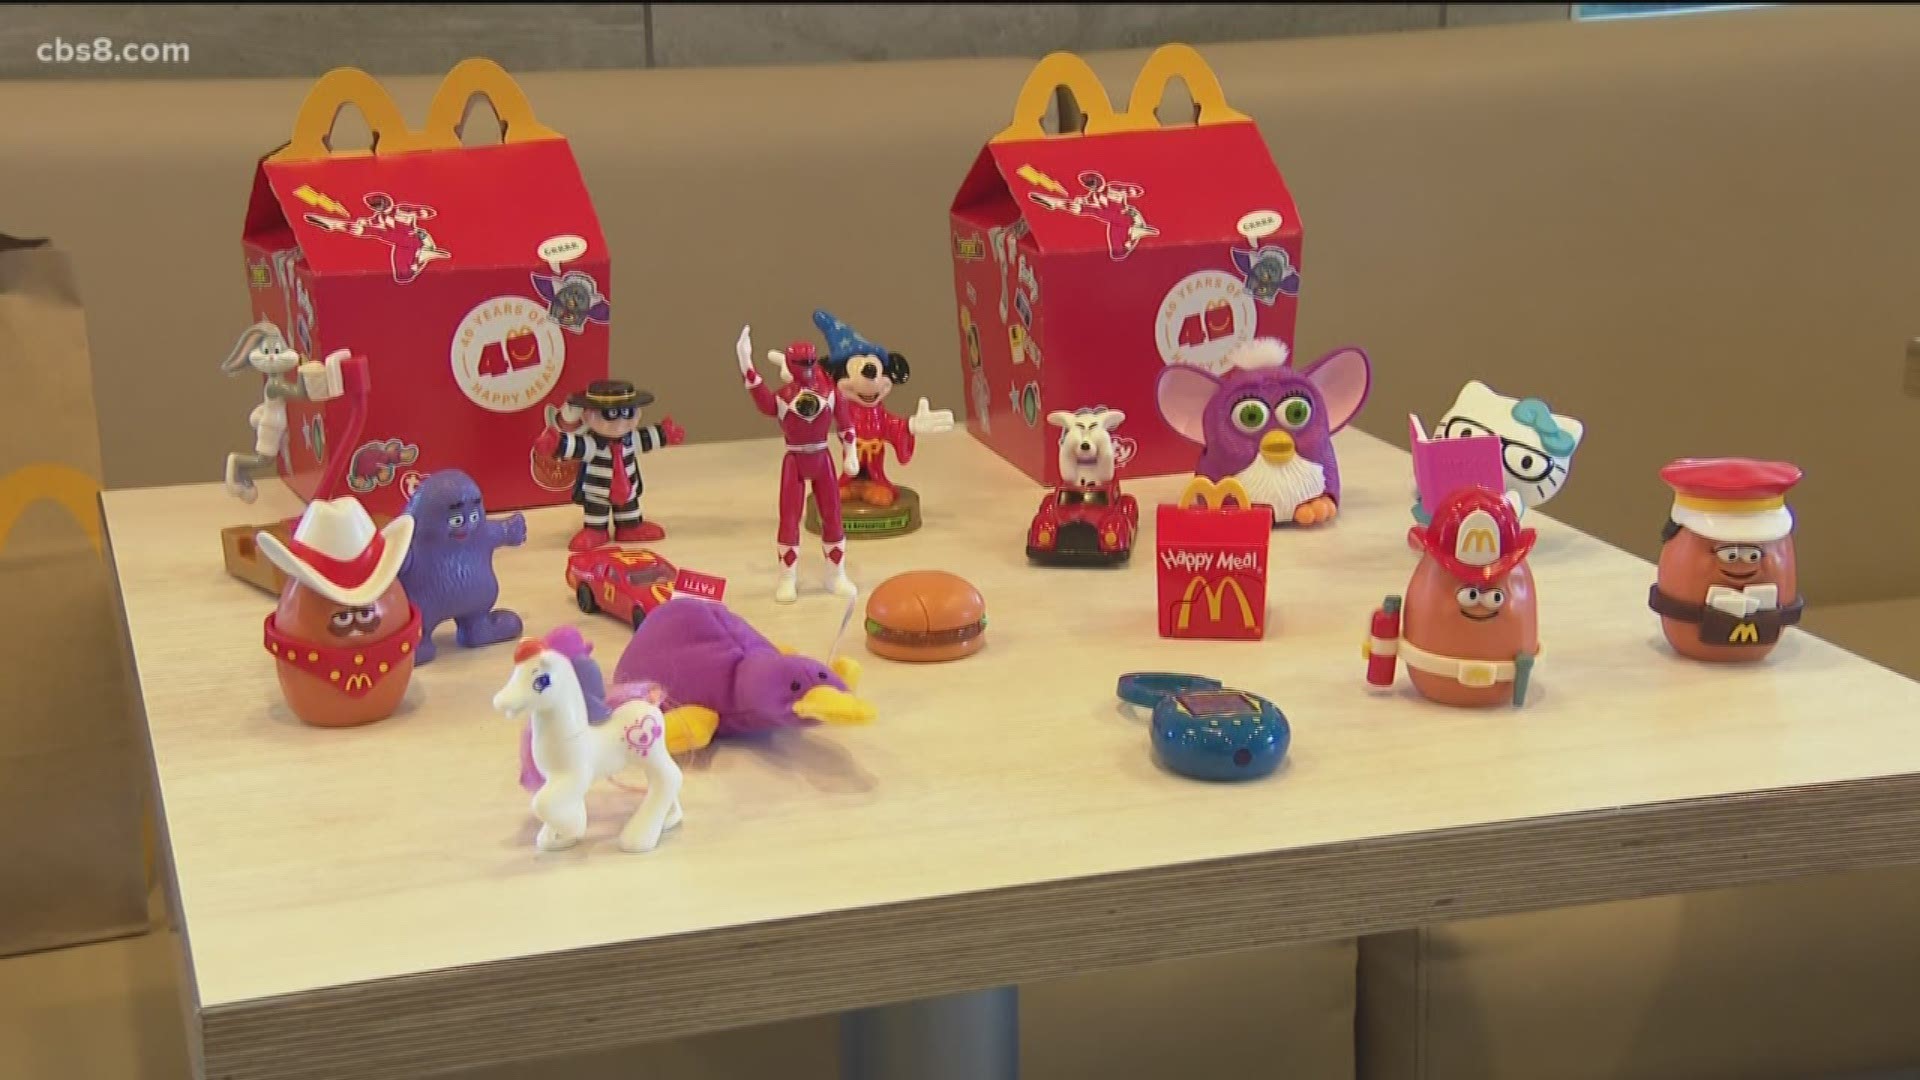 The fast-food giant said the "Happy Meal is all about creating feel good moments for families."